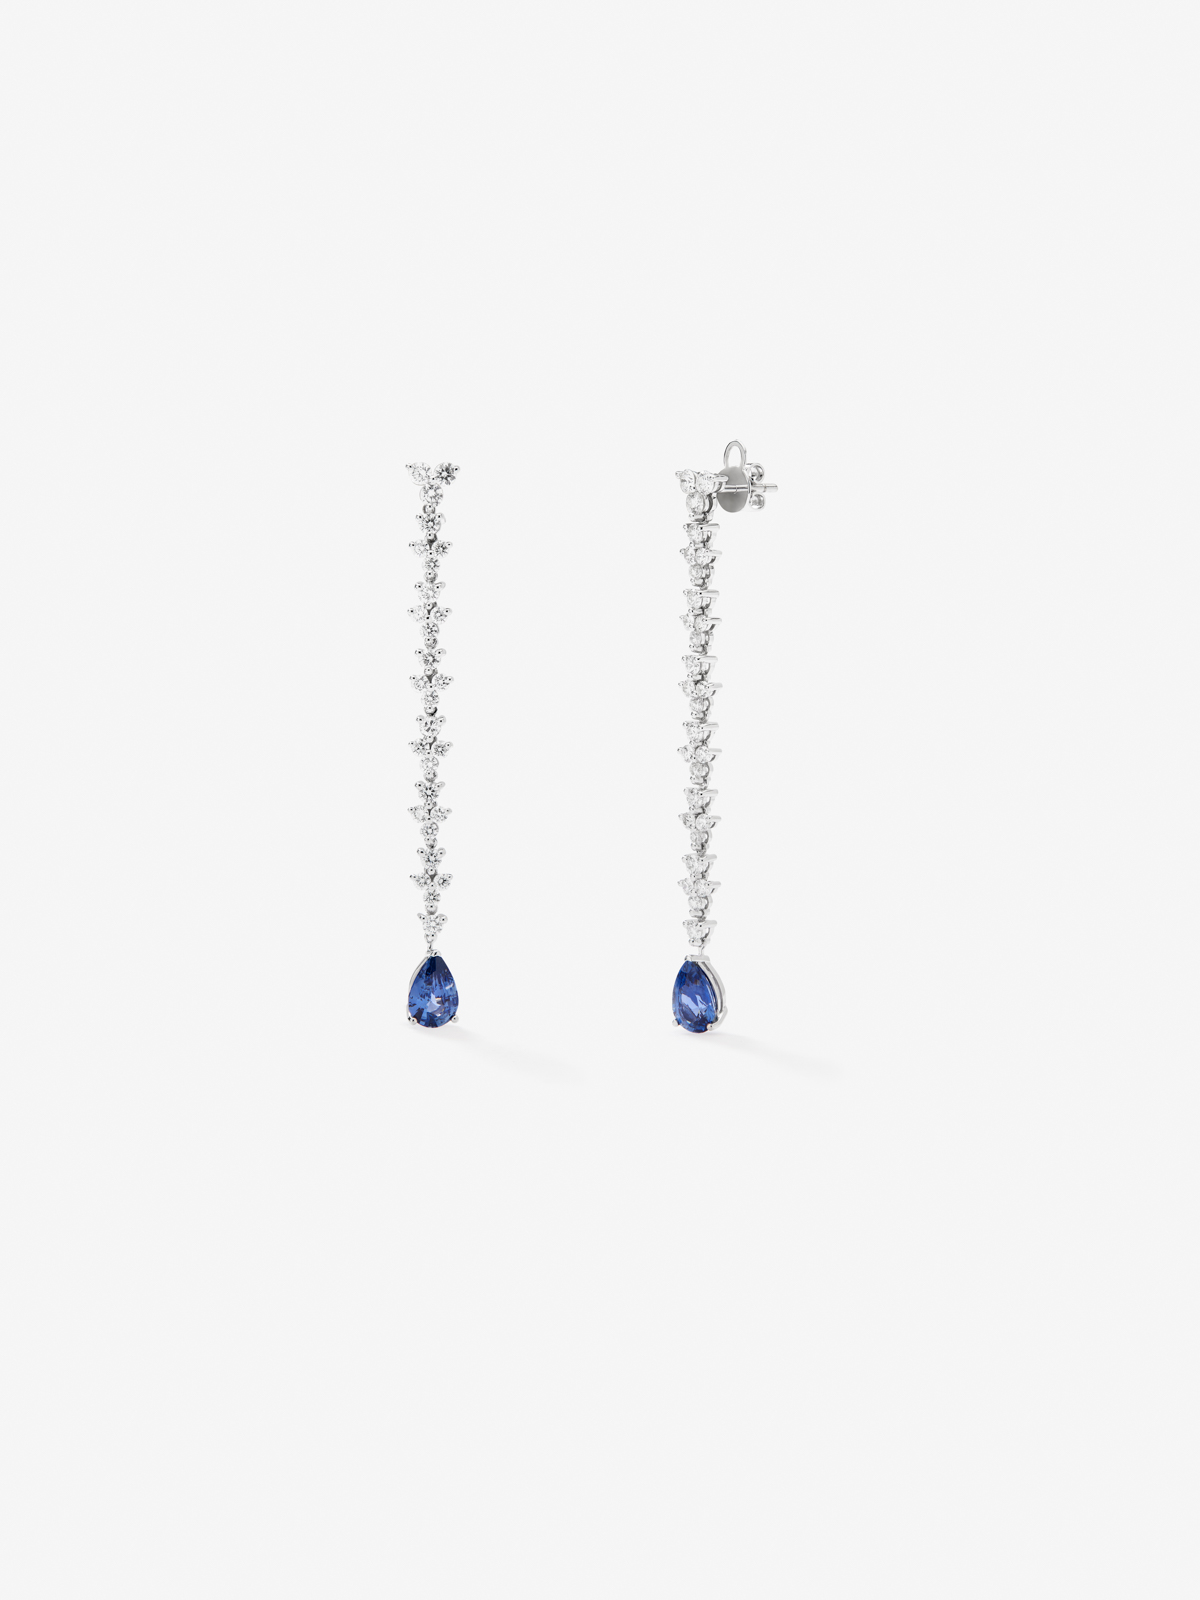 18K white gold earrings with blue zafiros in 2.63 cts and white diamonds in bright 2.12 cts